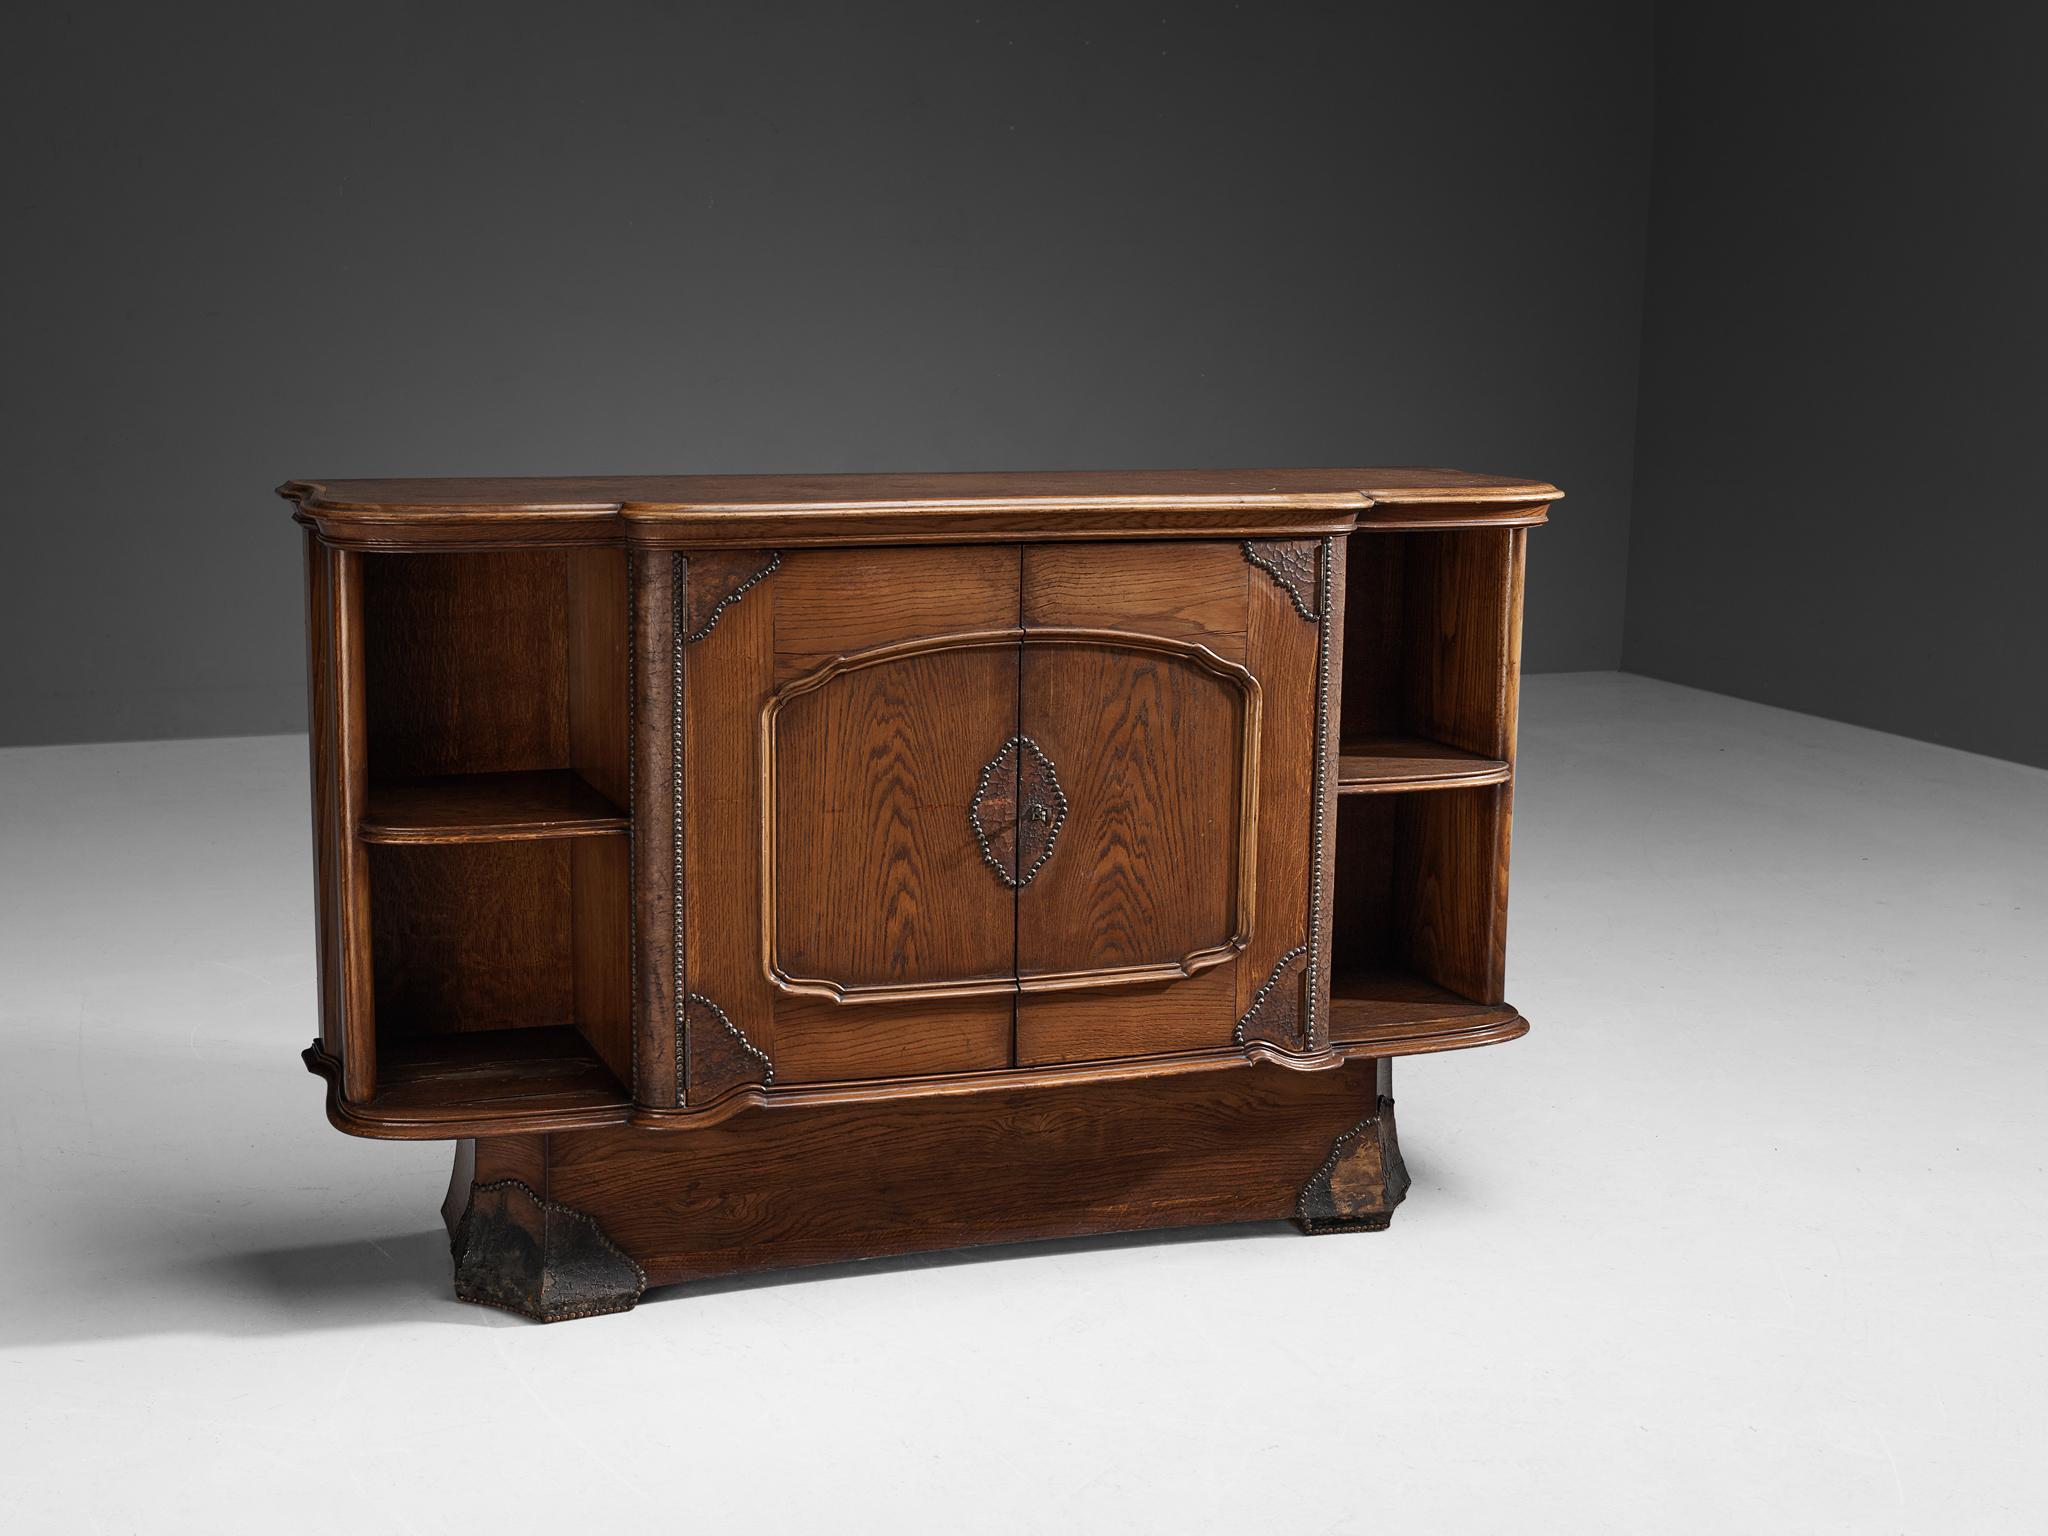 Ernesto Valabrega, cabinet, oak, leather, metal, Italy, circa 1935

This large cabinet in oak by Ernesto Valabrega features not only visual qualities but also great storage space. Two doors are structuring the outside and are furnished with a lock.